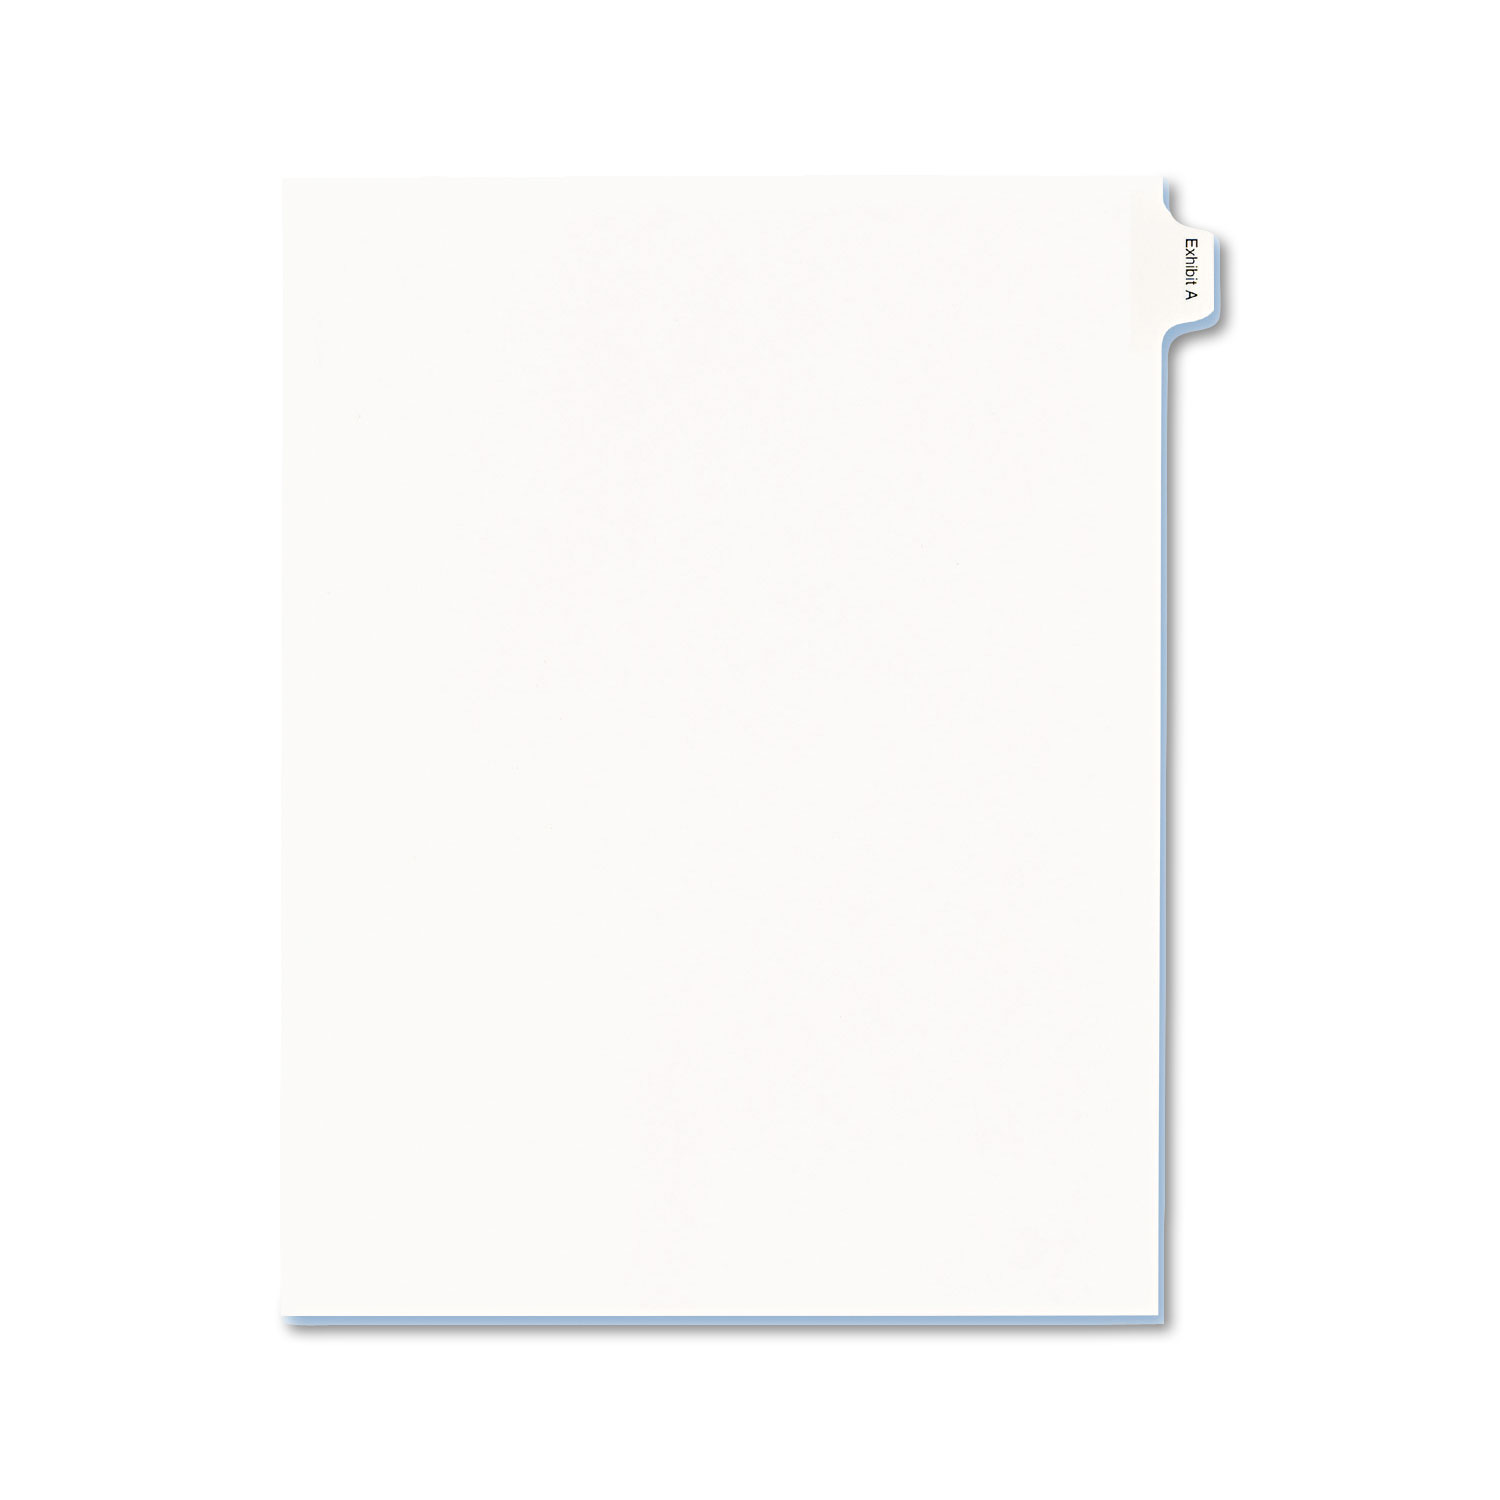  Avery 82107 Allstate-Style Legal Side Tab Dividers, Exhibit A, Letter, White, 25/Pack (AVE82107) 